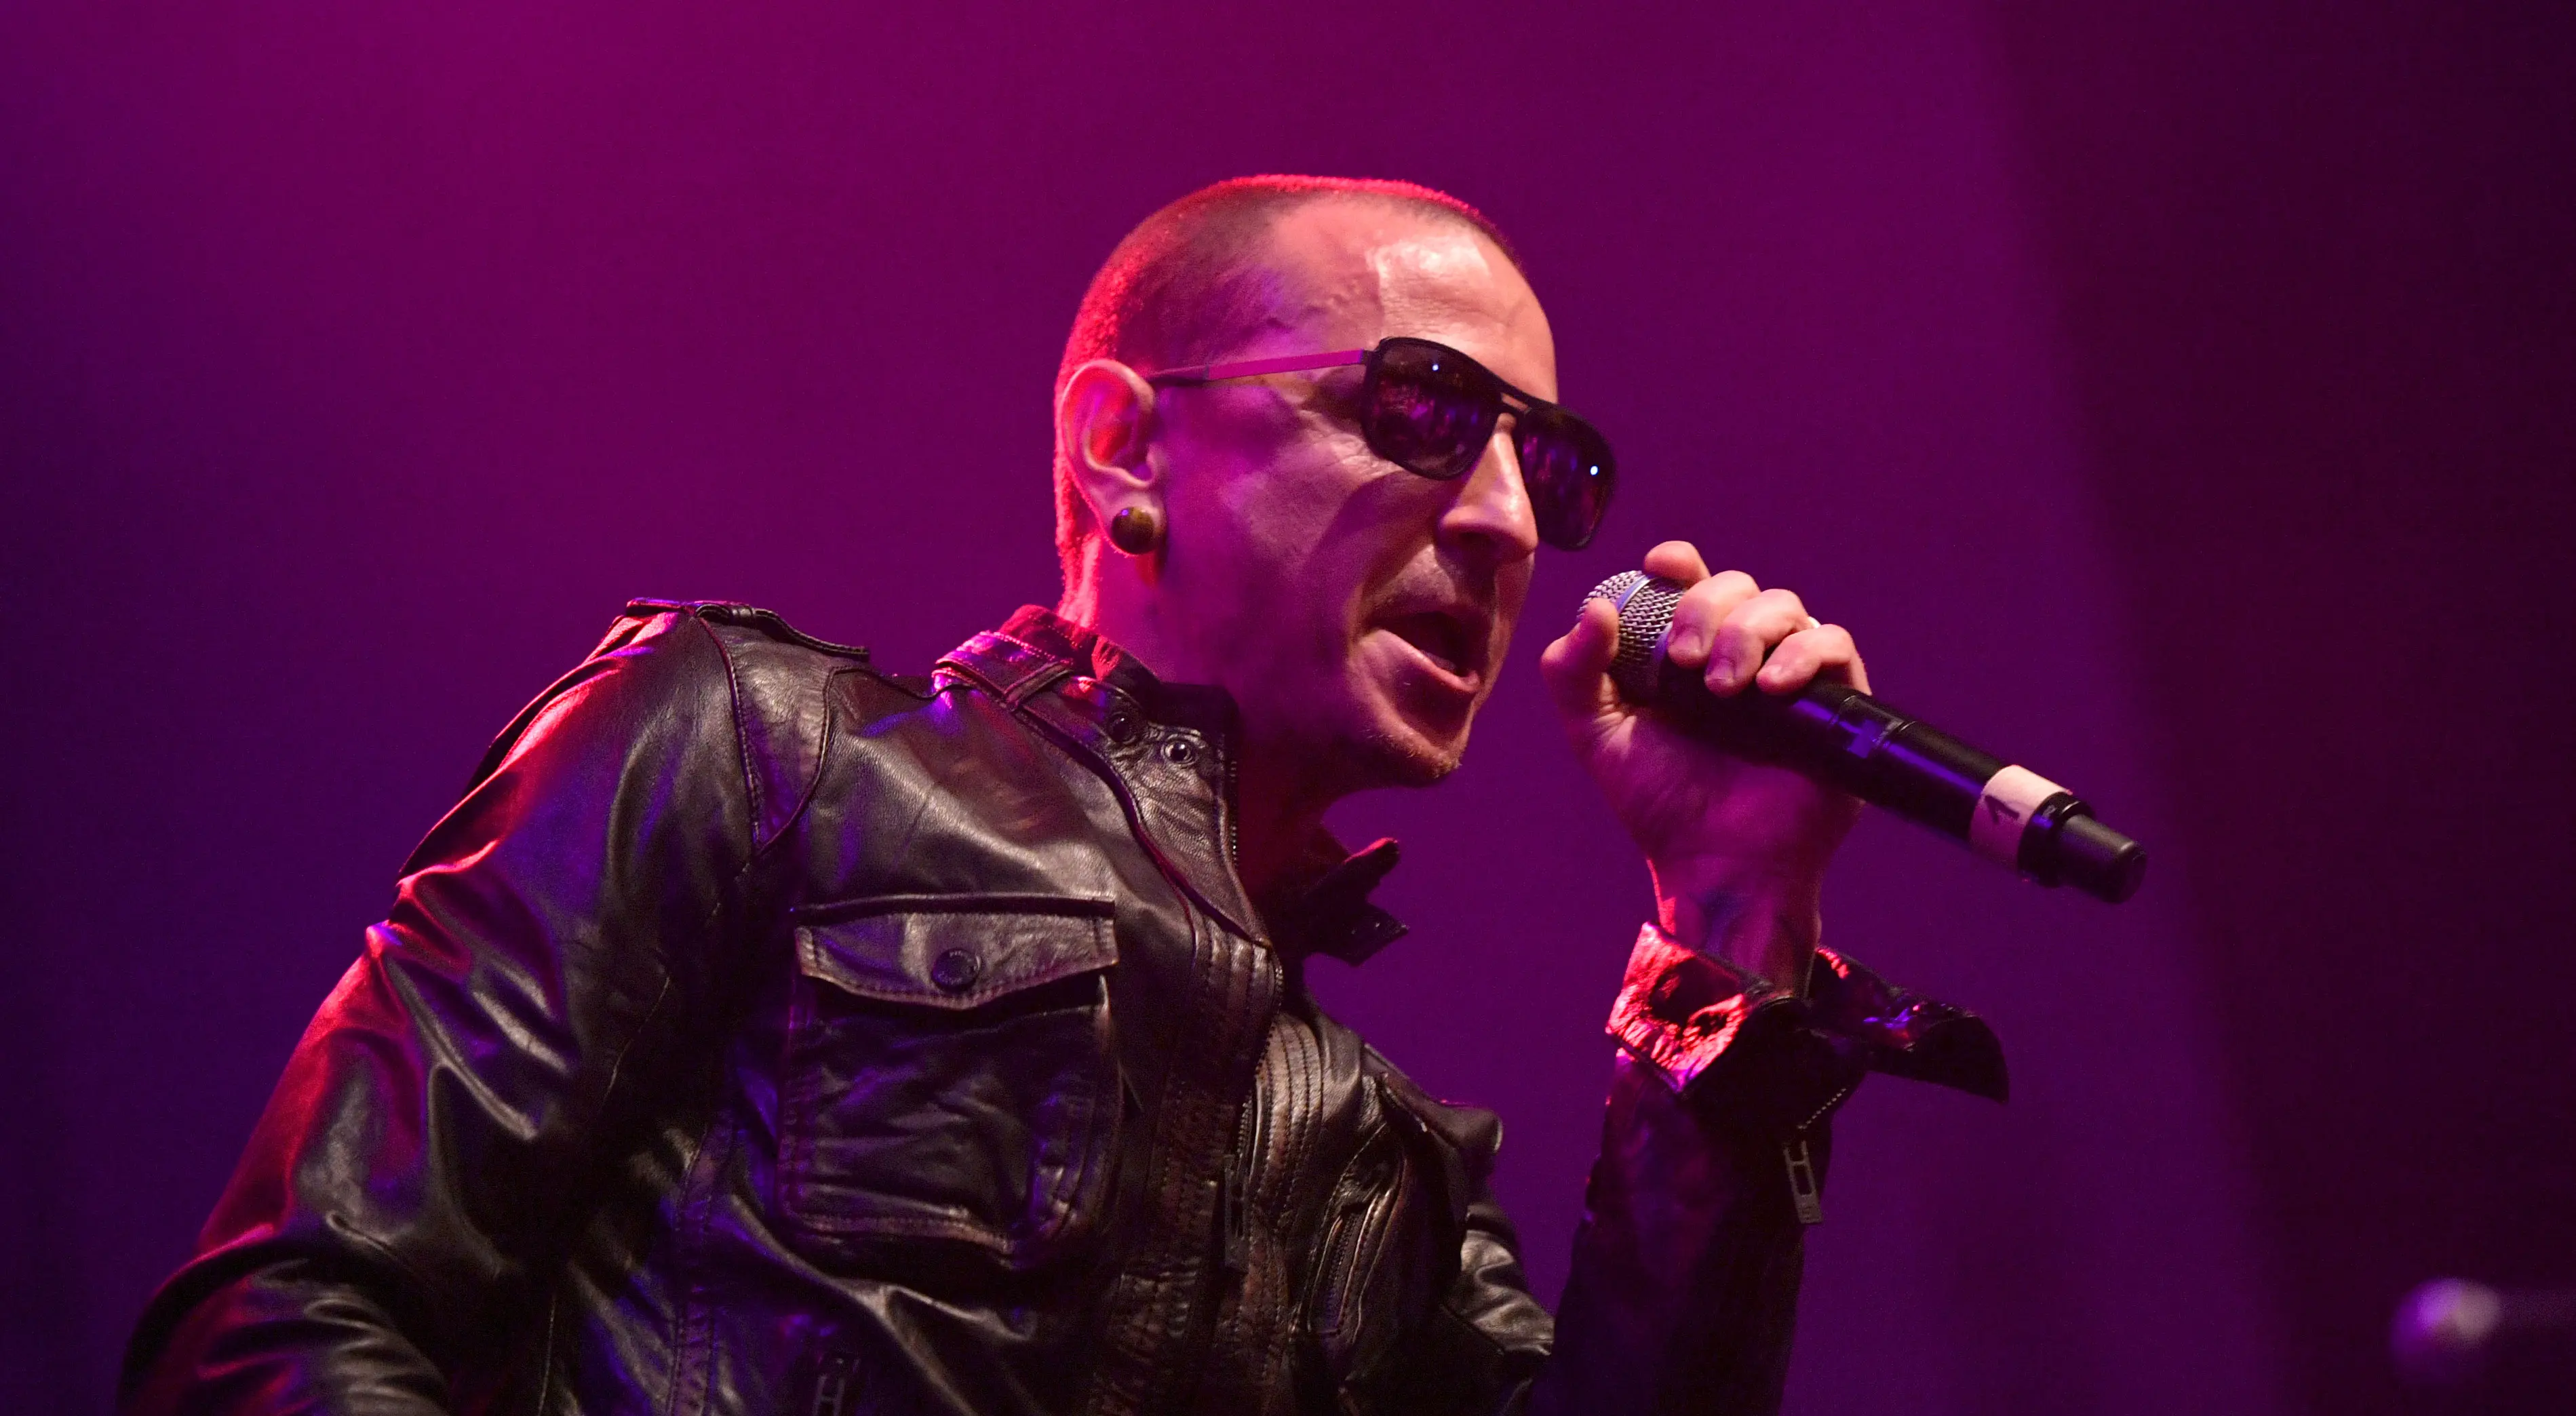 Chester Bennington. (AFP/Mike Windle / GETTY IMAGES NORTH AMERICA )